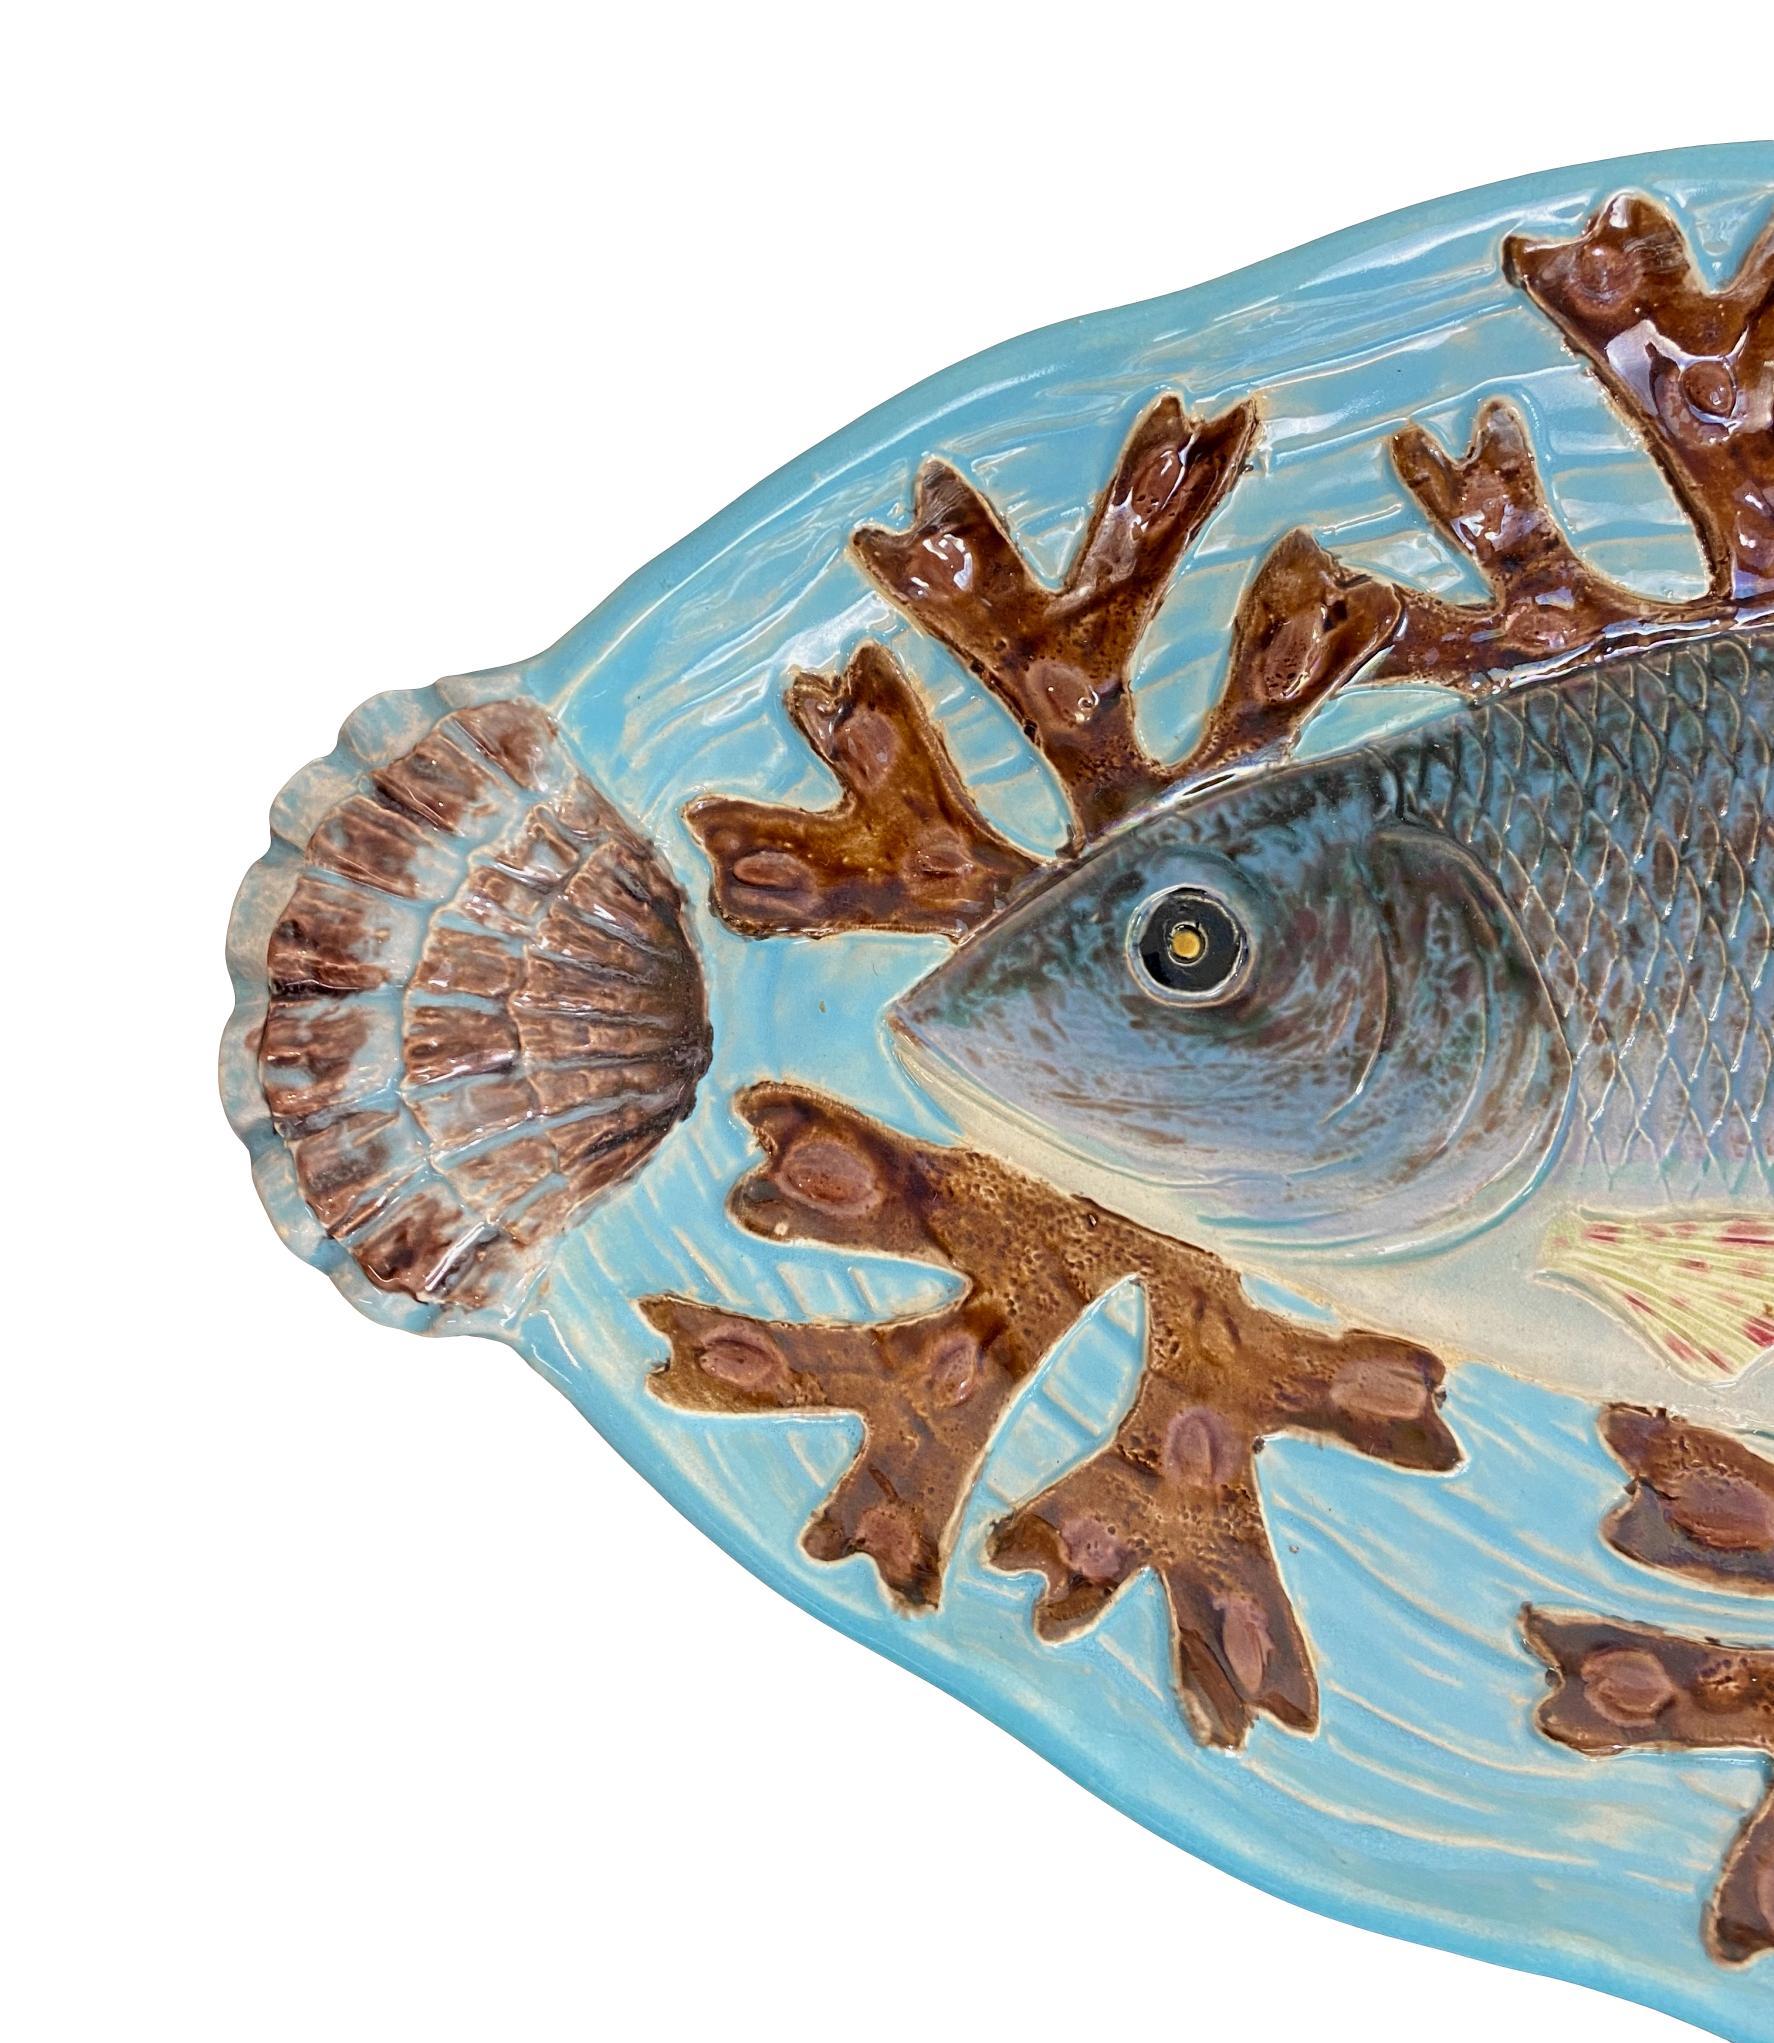 Joseph Holdcroft Majolica Trompe L'oeil salmon platter, naturalistically molded with a life-like salmon on a bed of red seaweed, on a relief molded basket-weave turquoise ground. Measures: 22-ins. wide.

For 30 years we have been among the world's